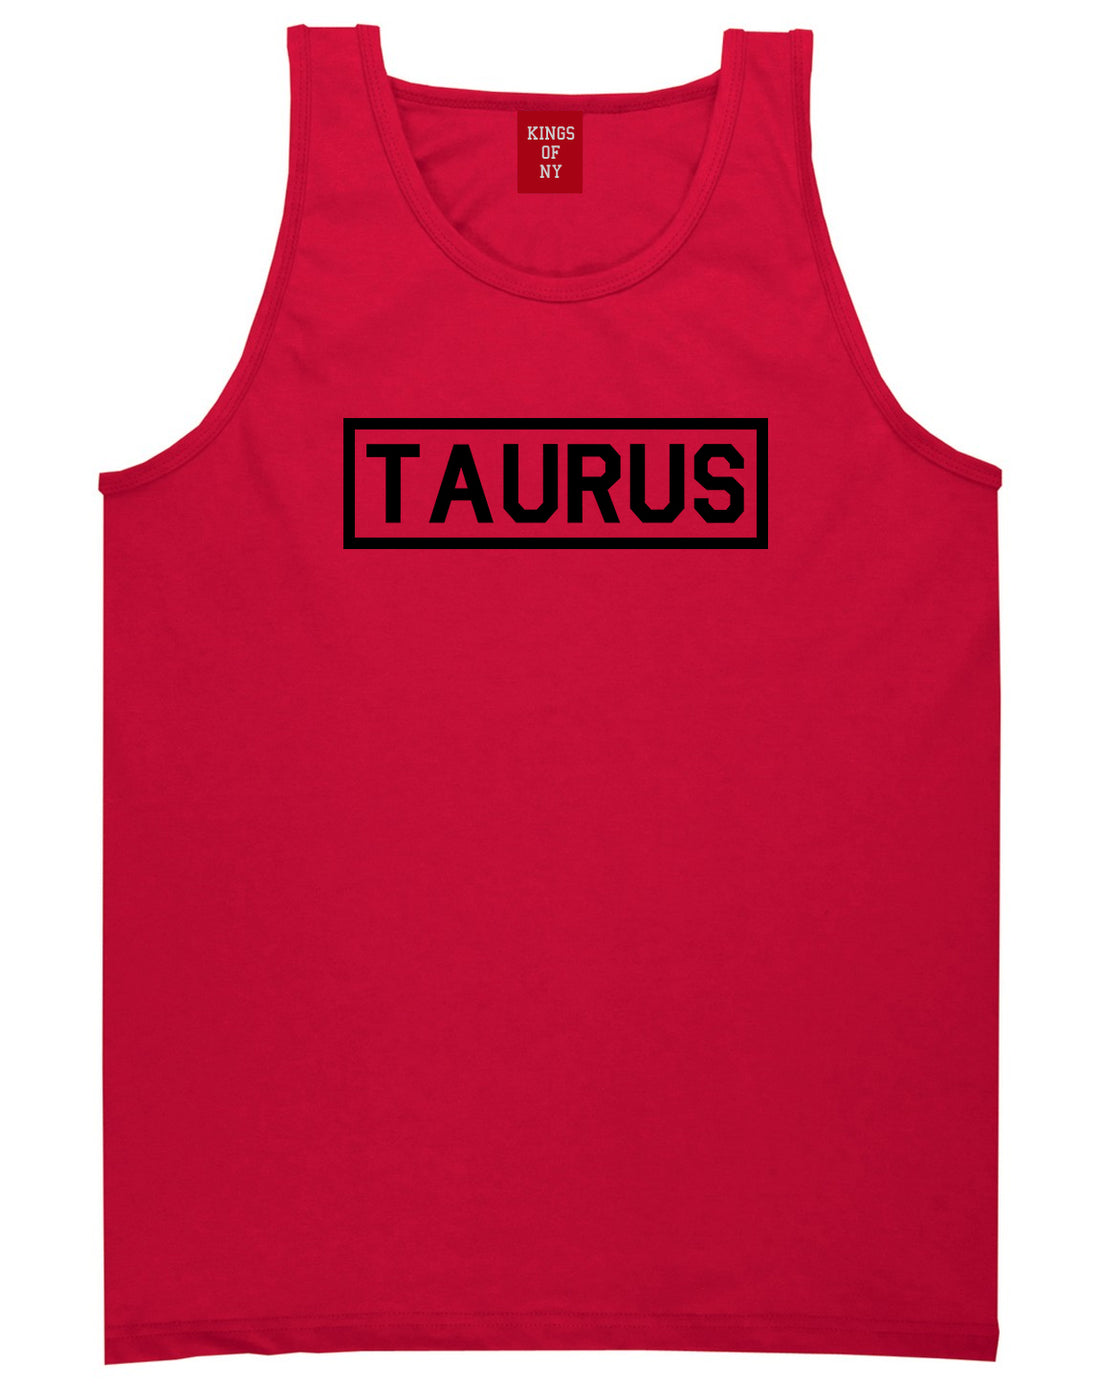 Taurus Horoscope Sign Mens Red Tank Top Shirt by KINGS OF NY